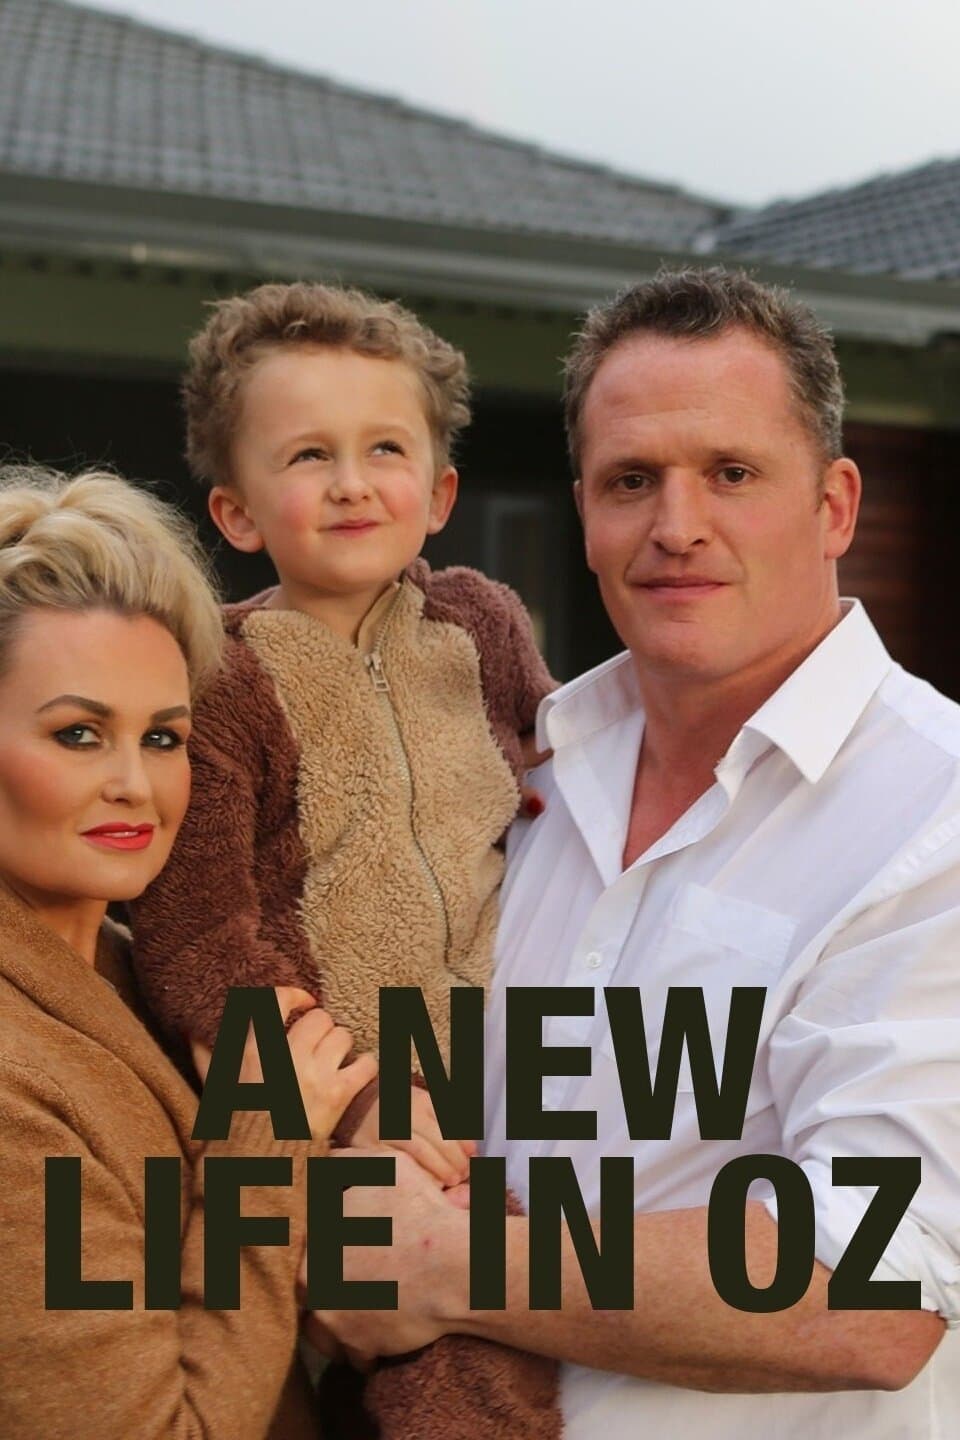 A New Life in Oz